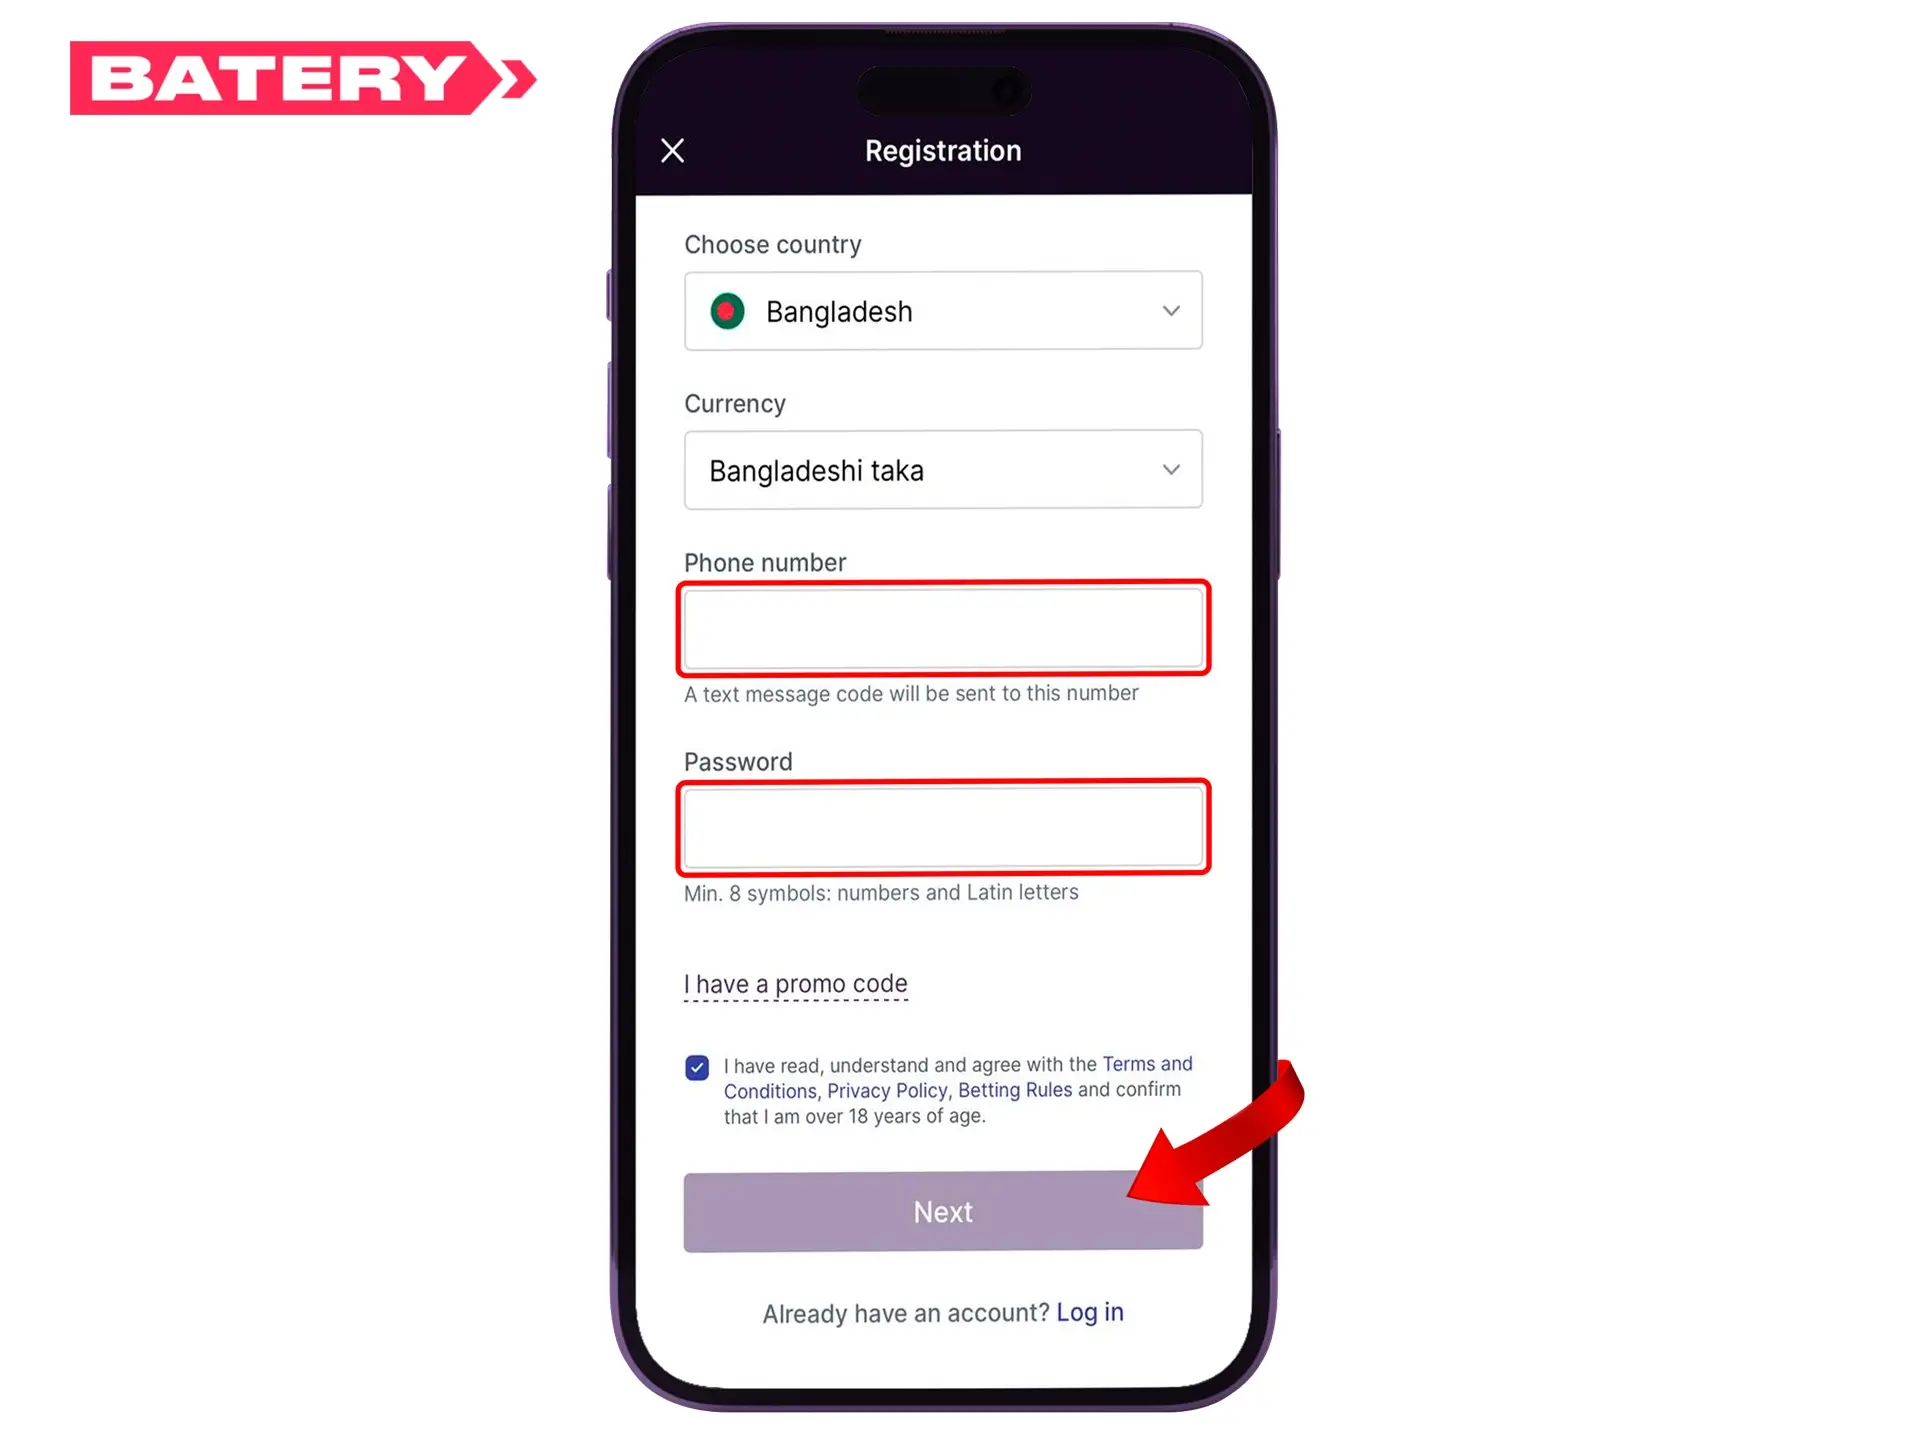 Enter your data, click "Next" and go for the wins with Batery.